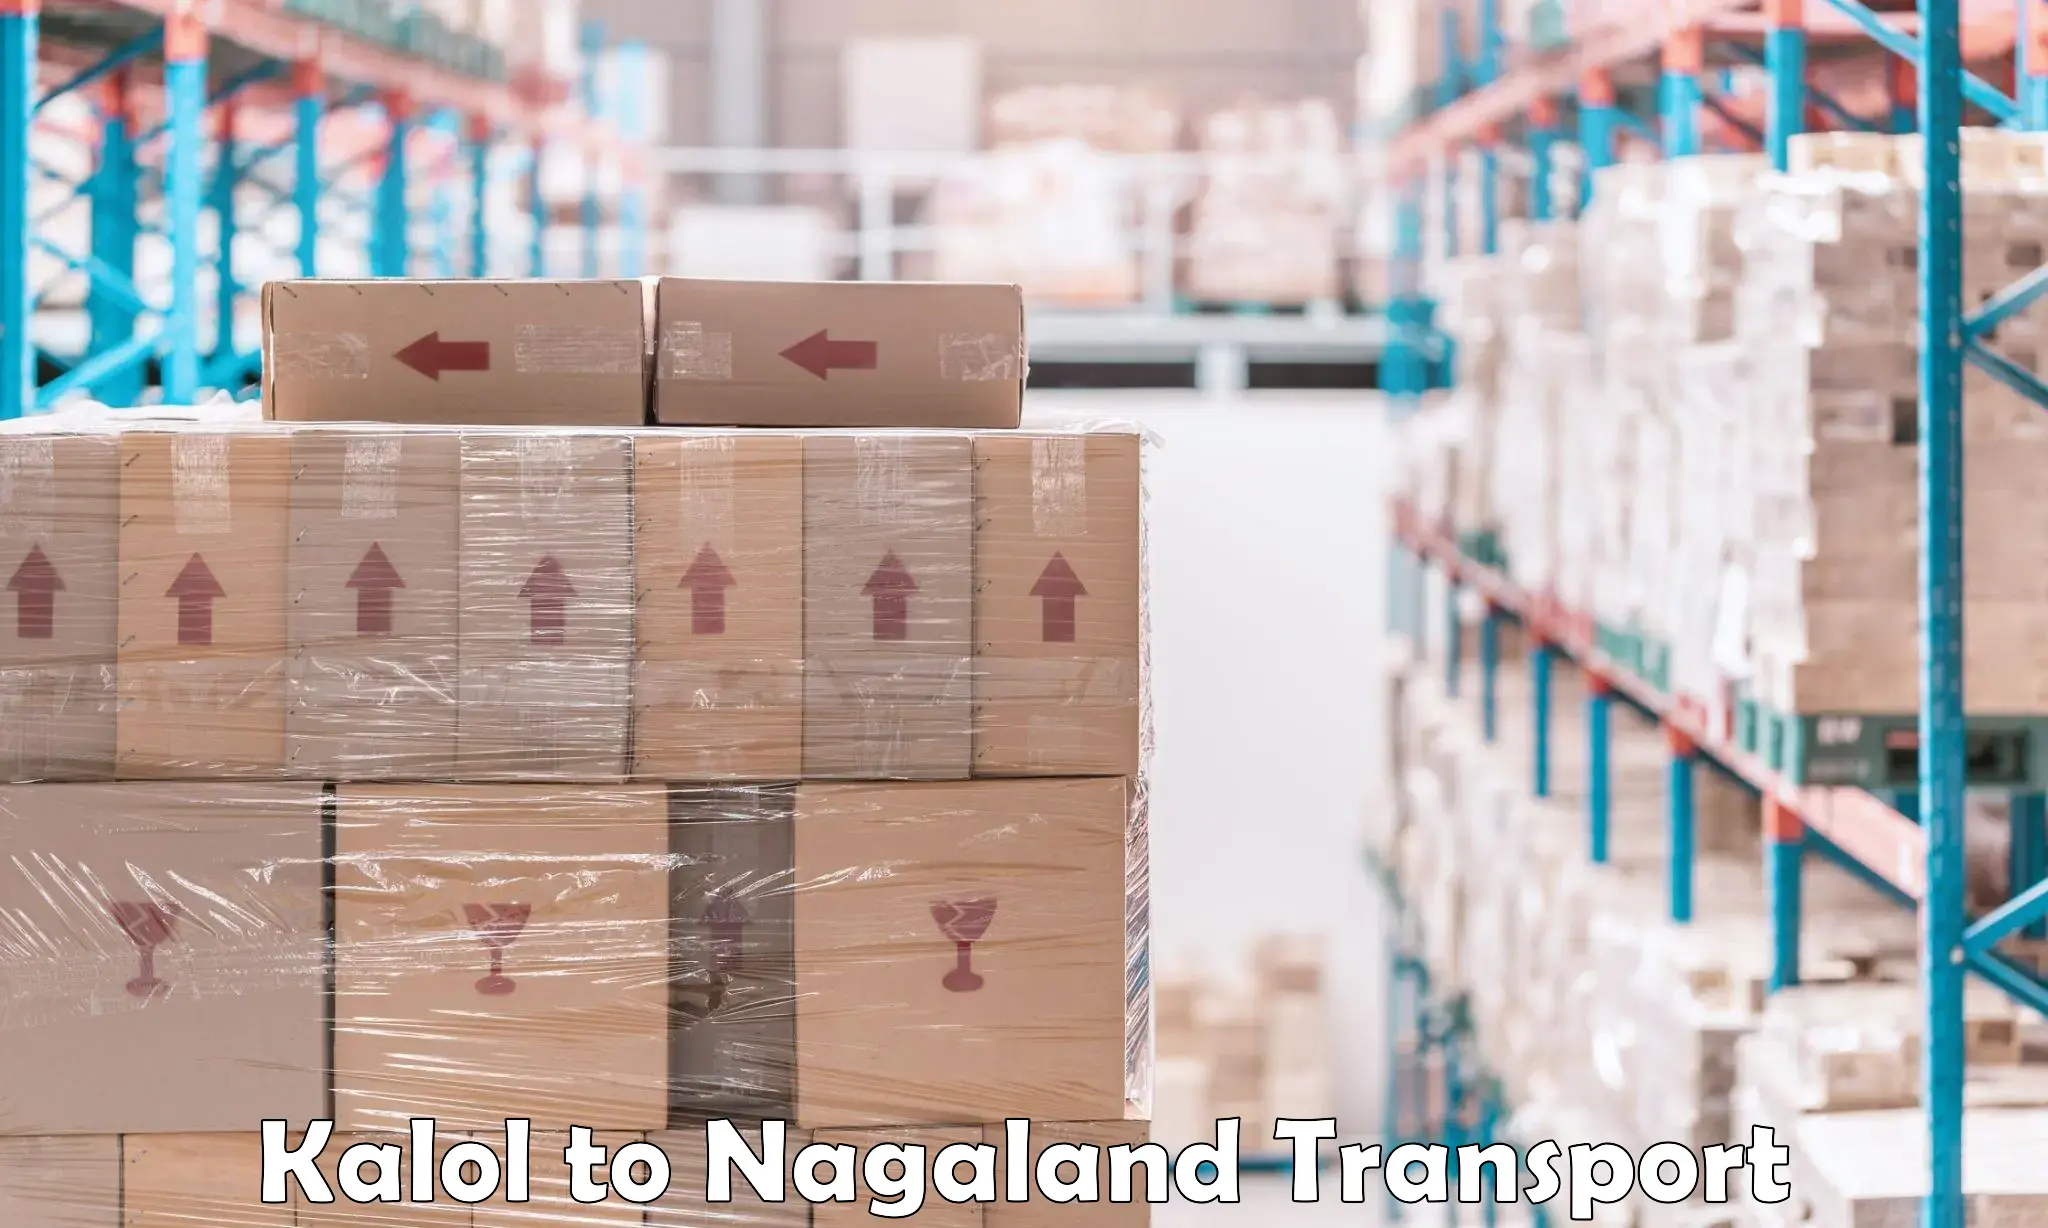 Container transport service Kalol to Nagaland